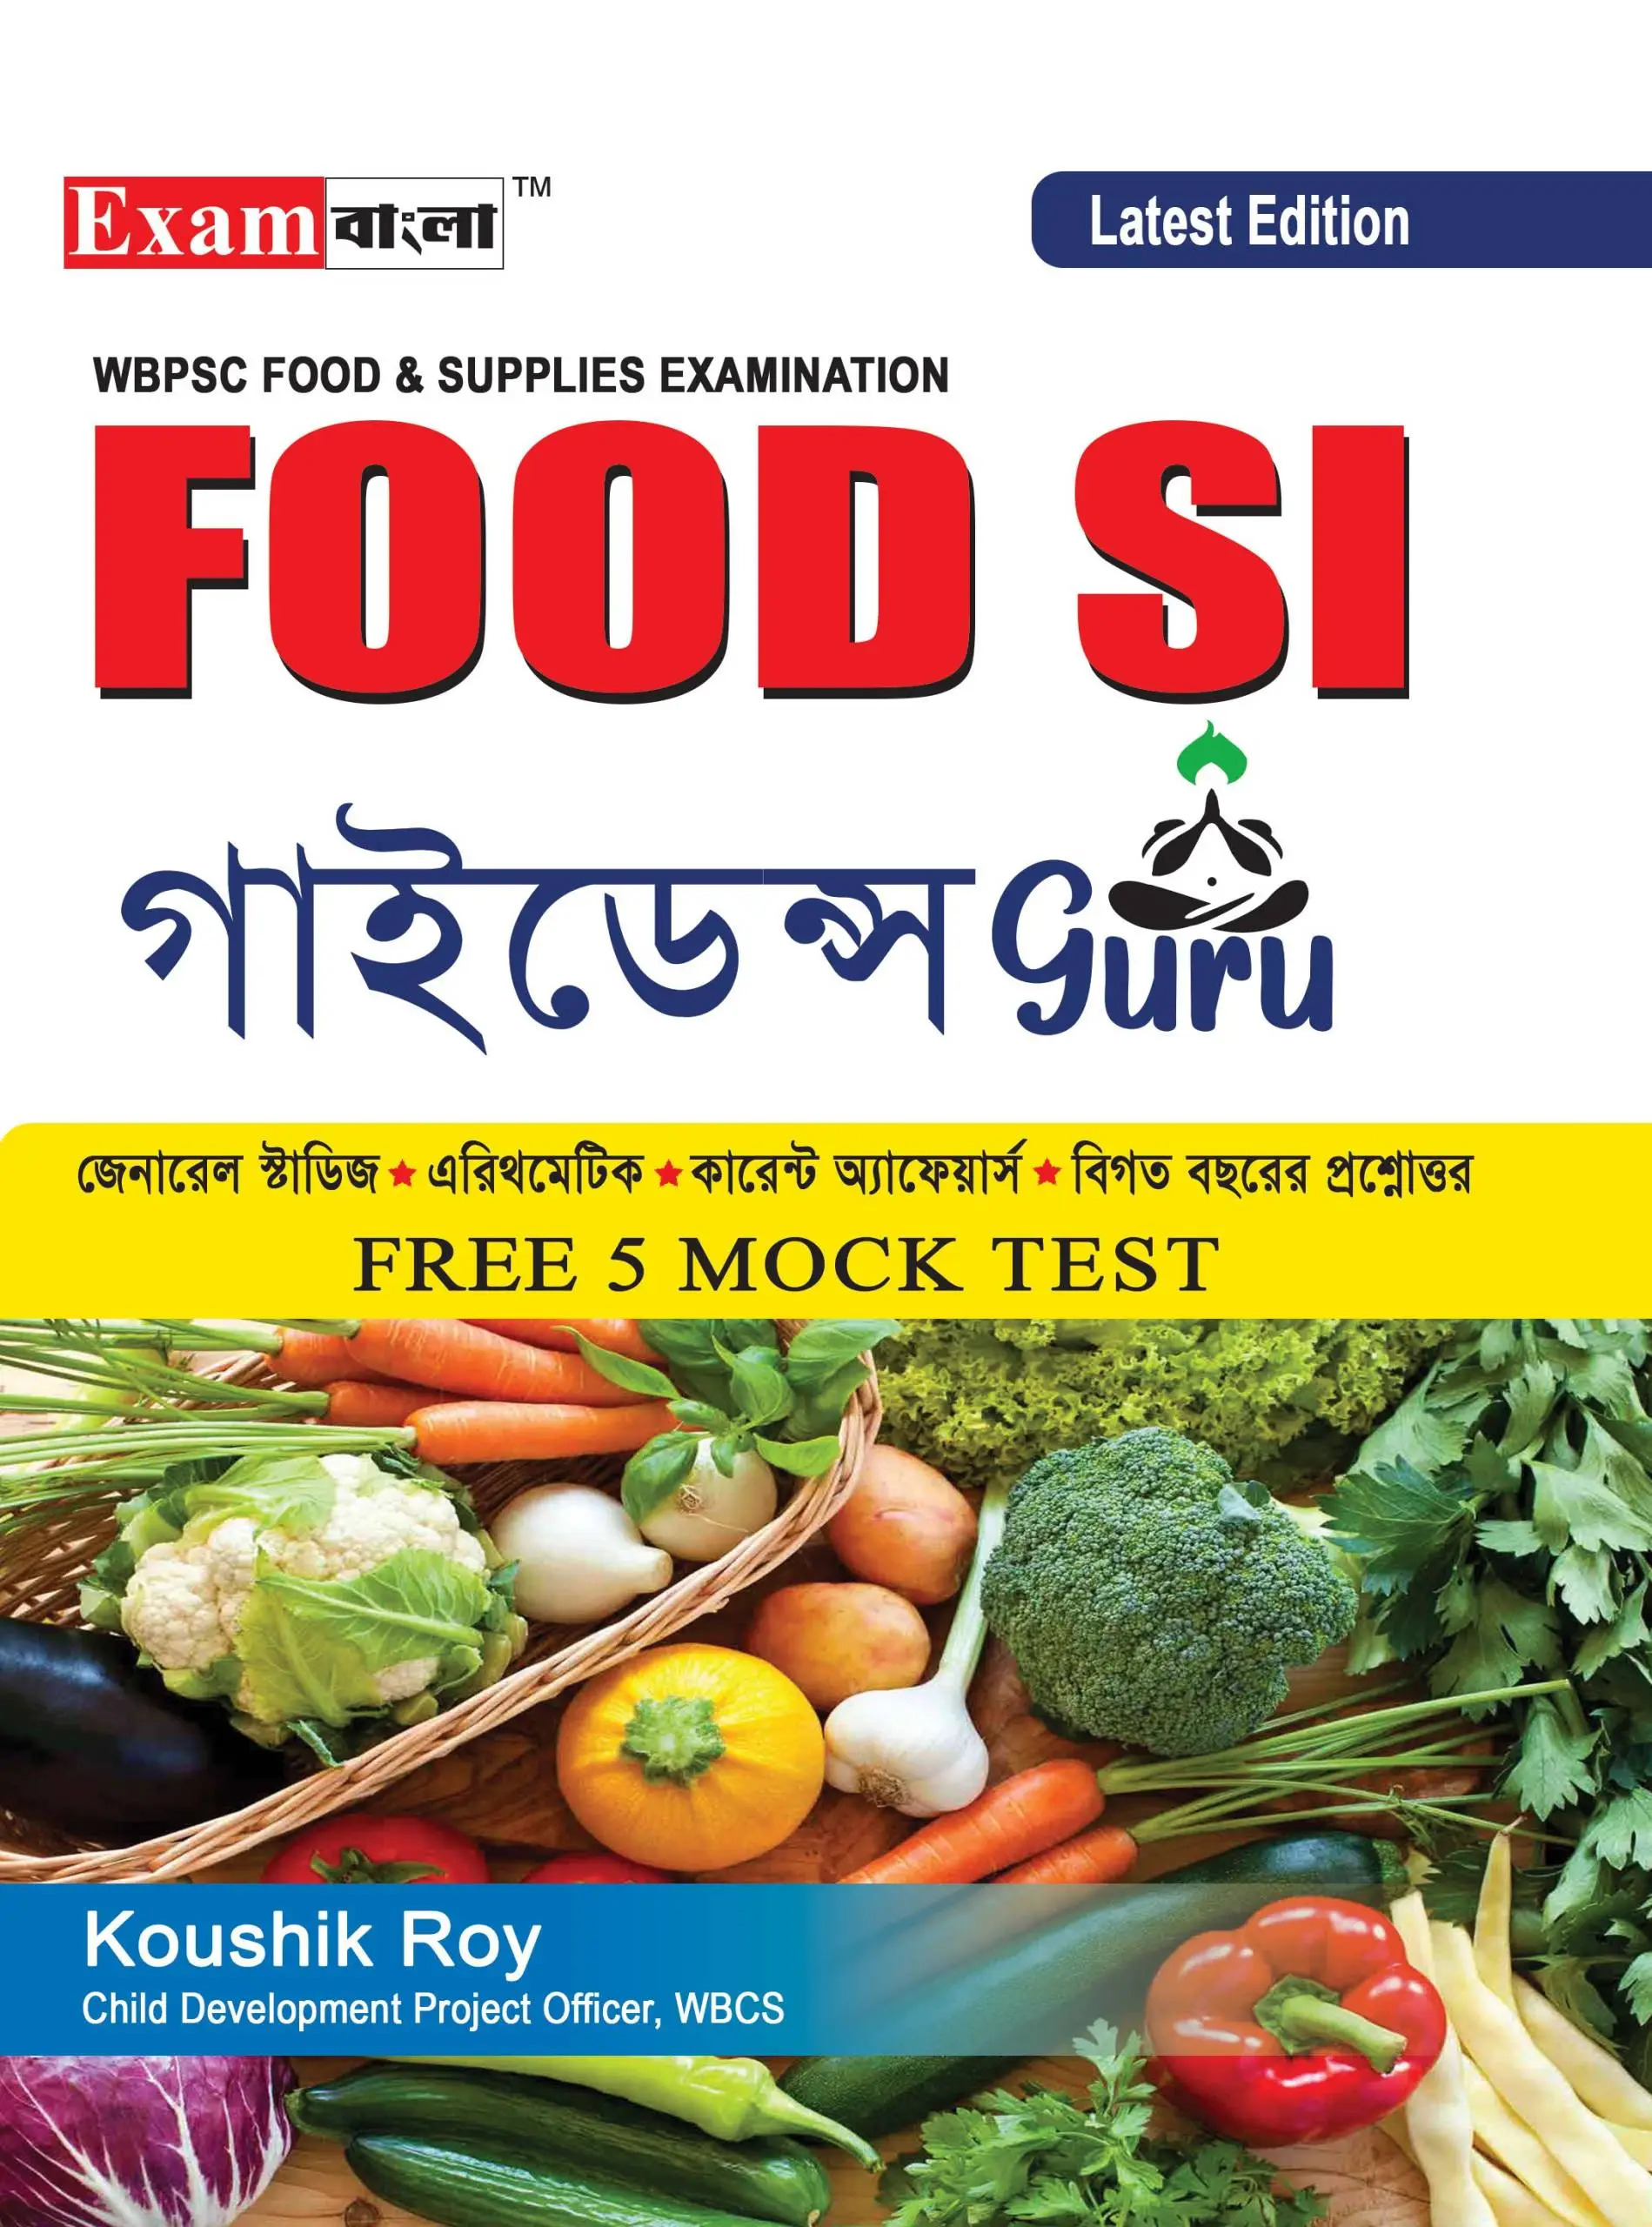 WBPSC Food SI Admit Card 2024